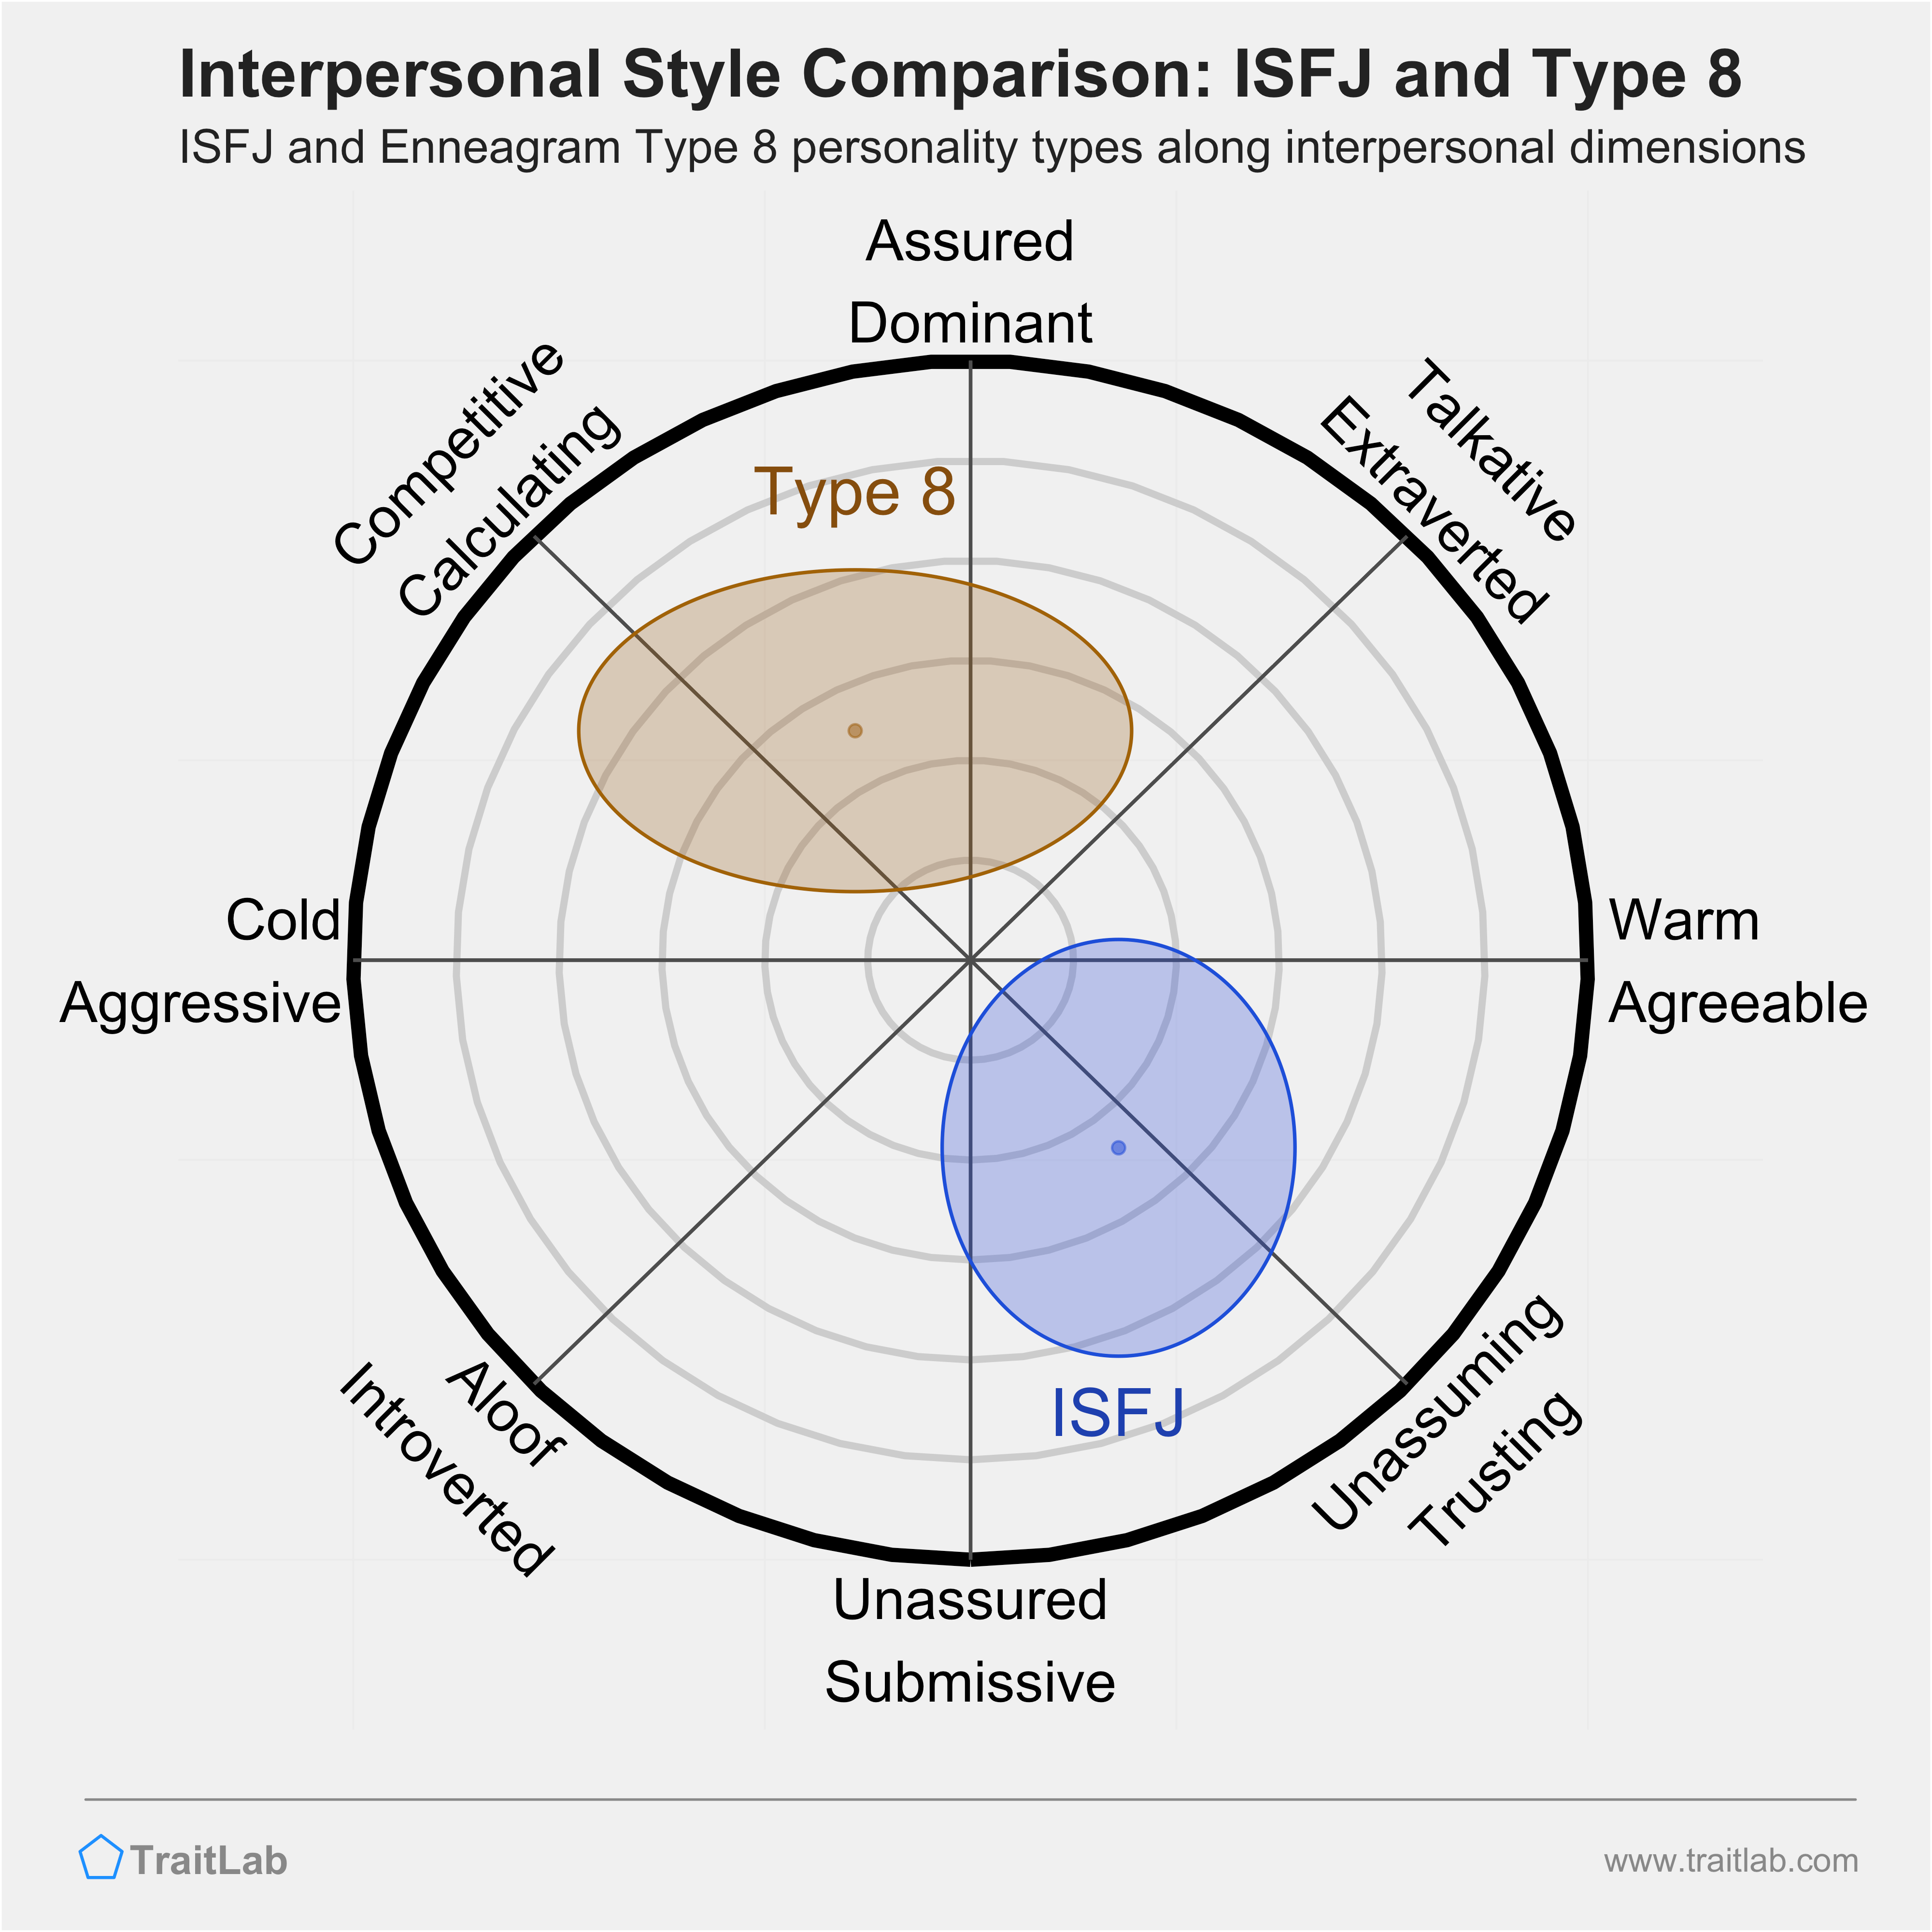 Enneagram ISFJ and Type 8 comparison across interpersonal dimensions